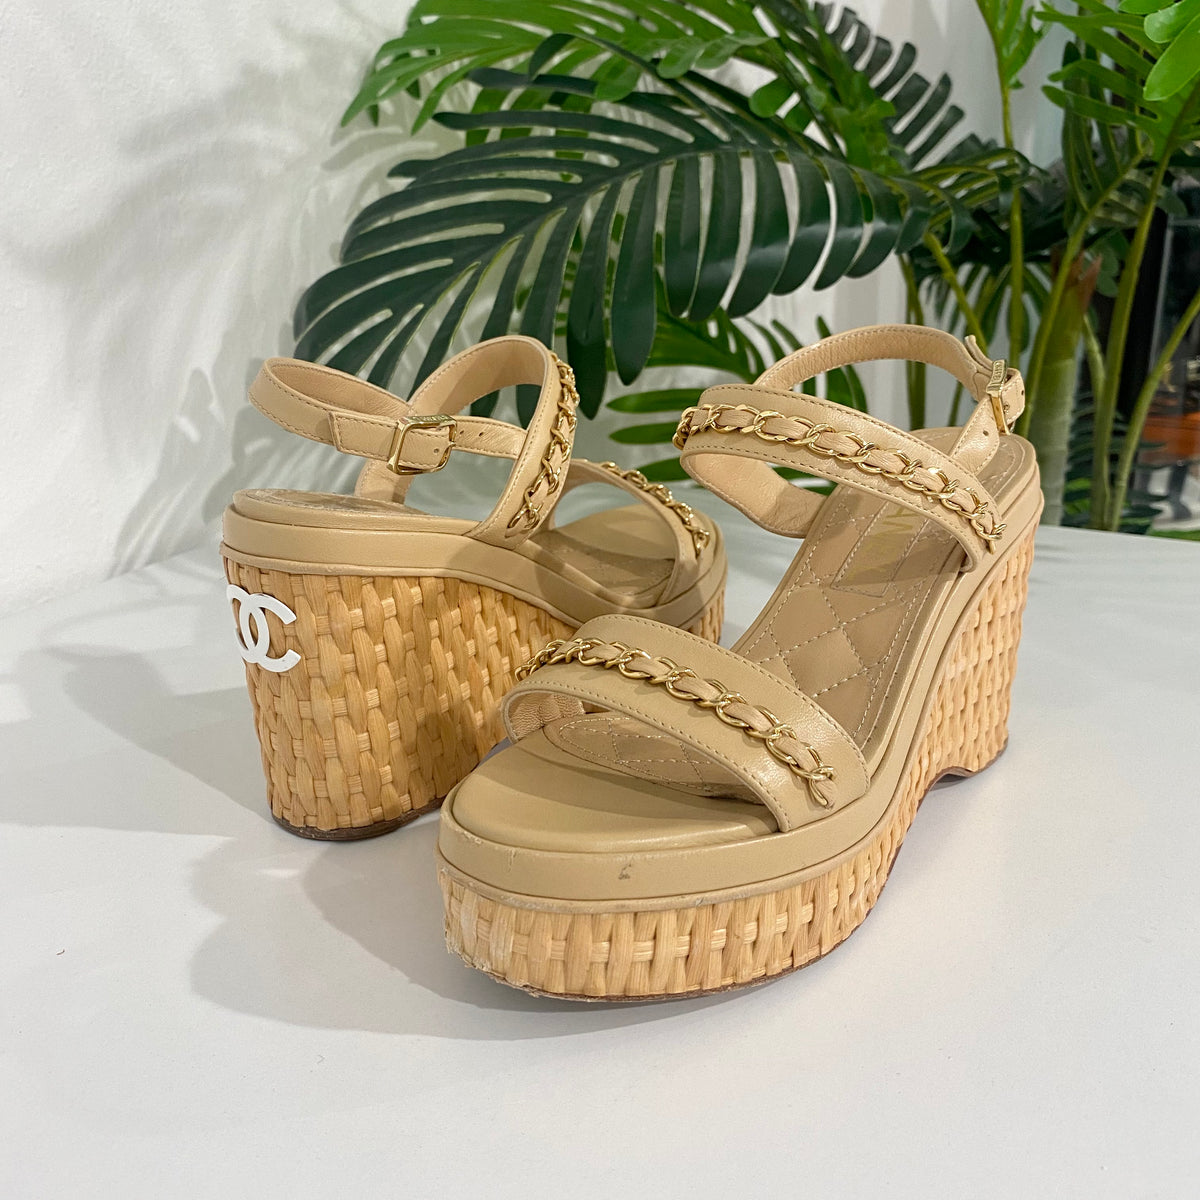 Chanel Jumbo CC Sandals – Dina C's Fab and Funky Consignment Boutique